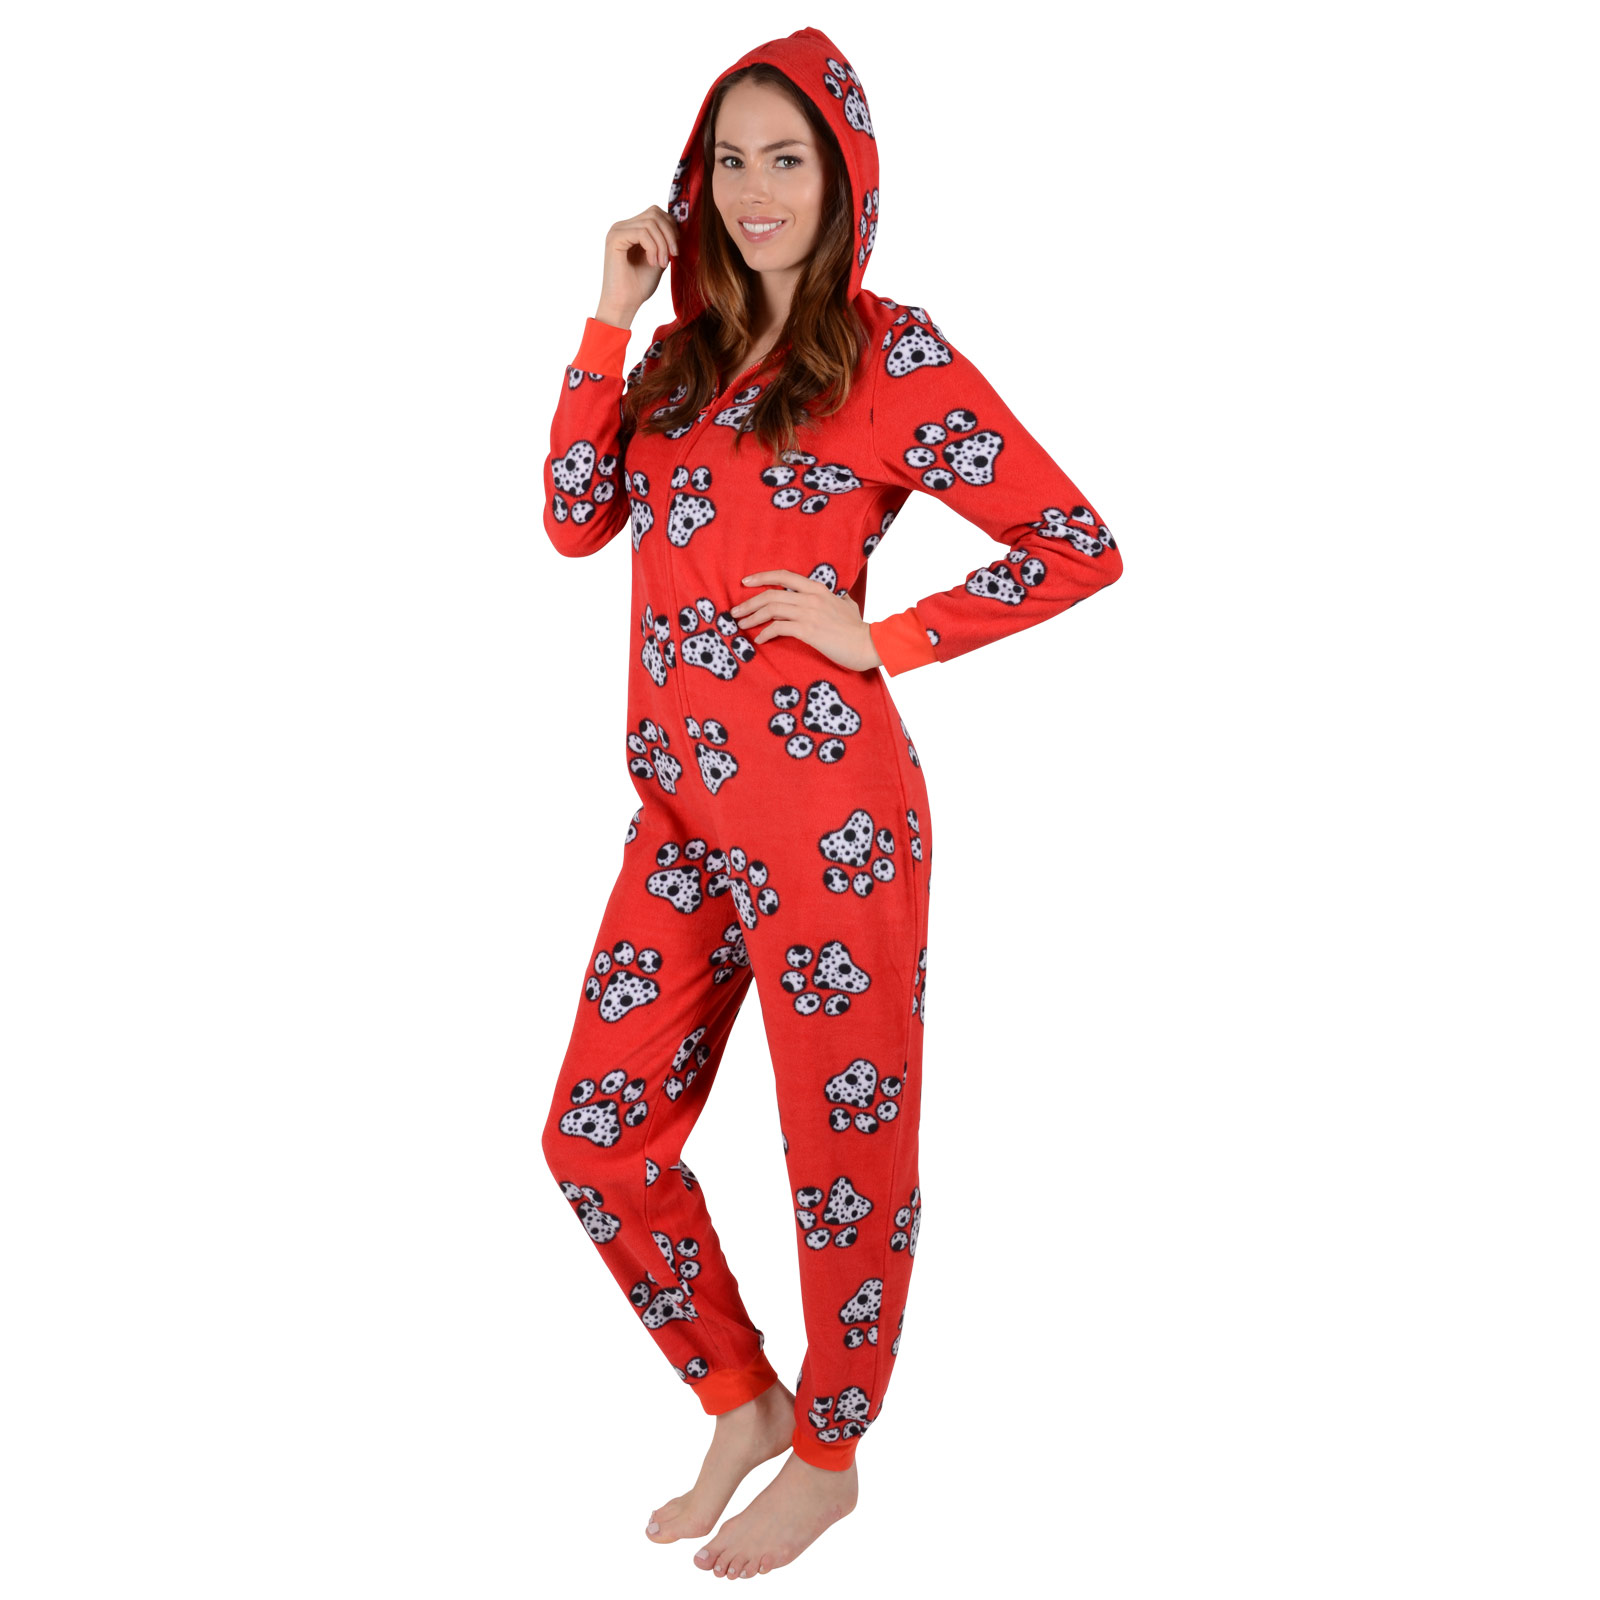 view all Red Onsie Cliparts). 